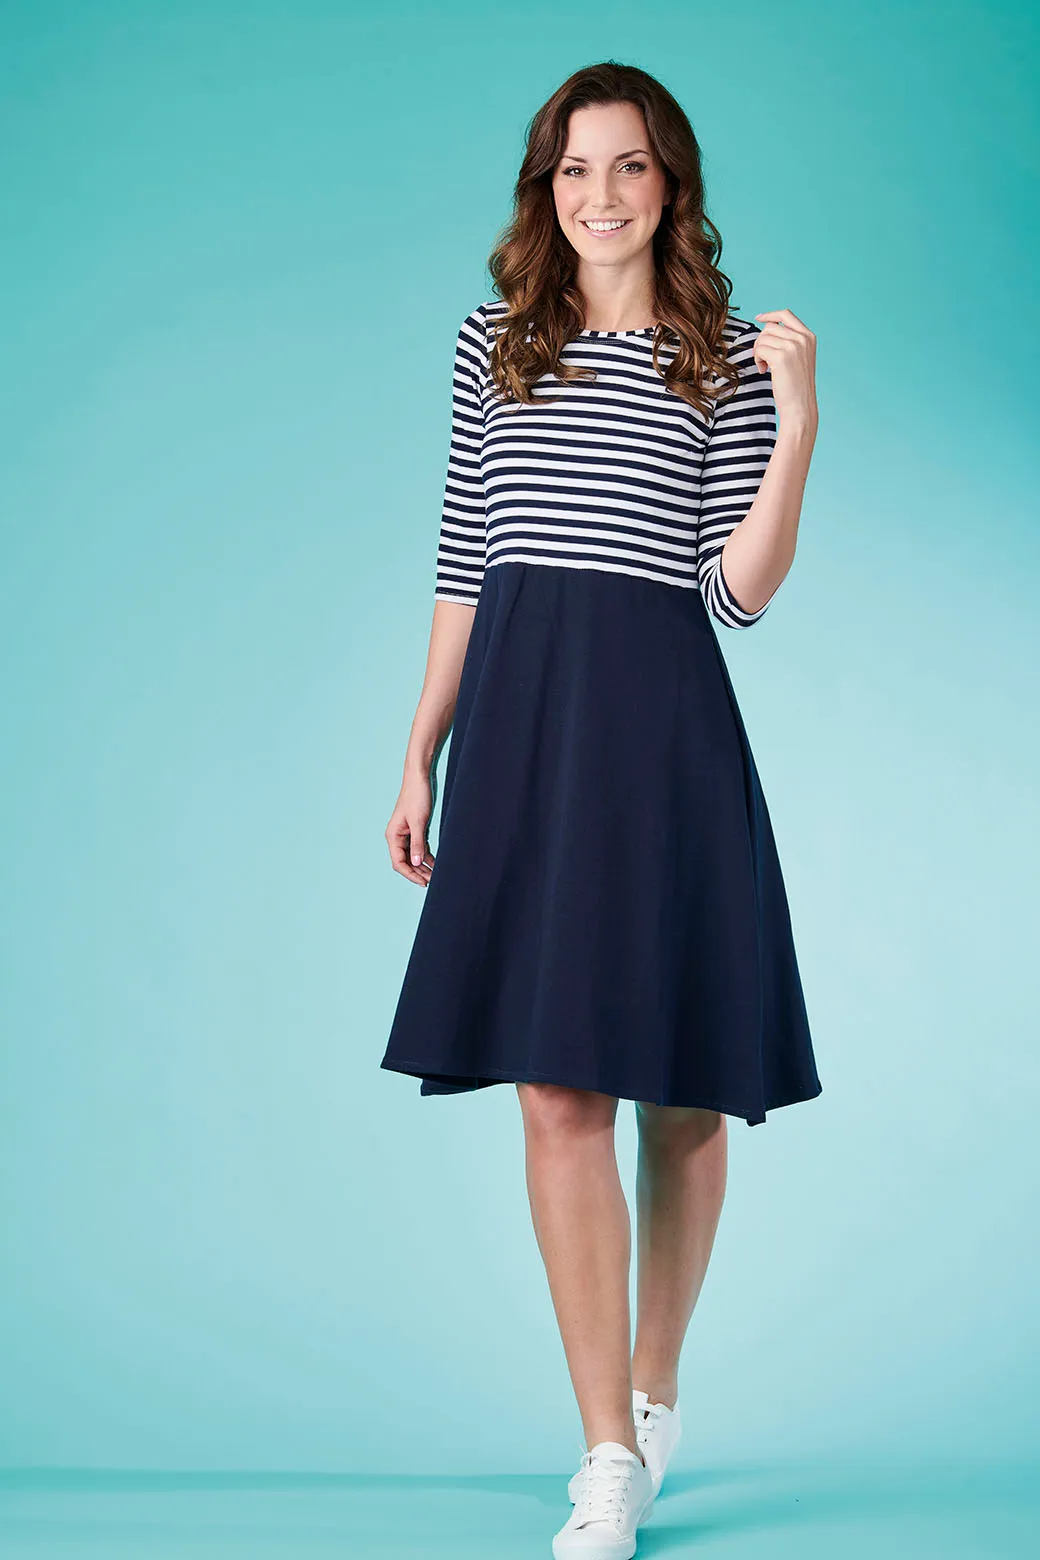 Breton dress sewing pattern from Simply Sewing